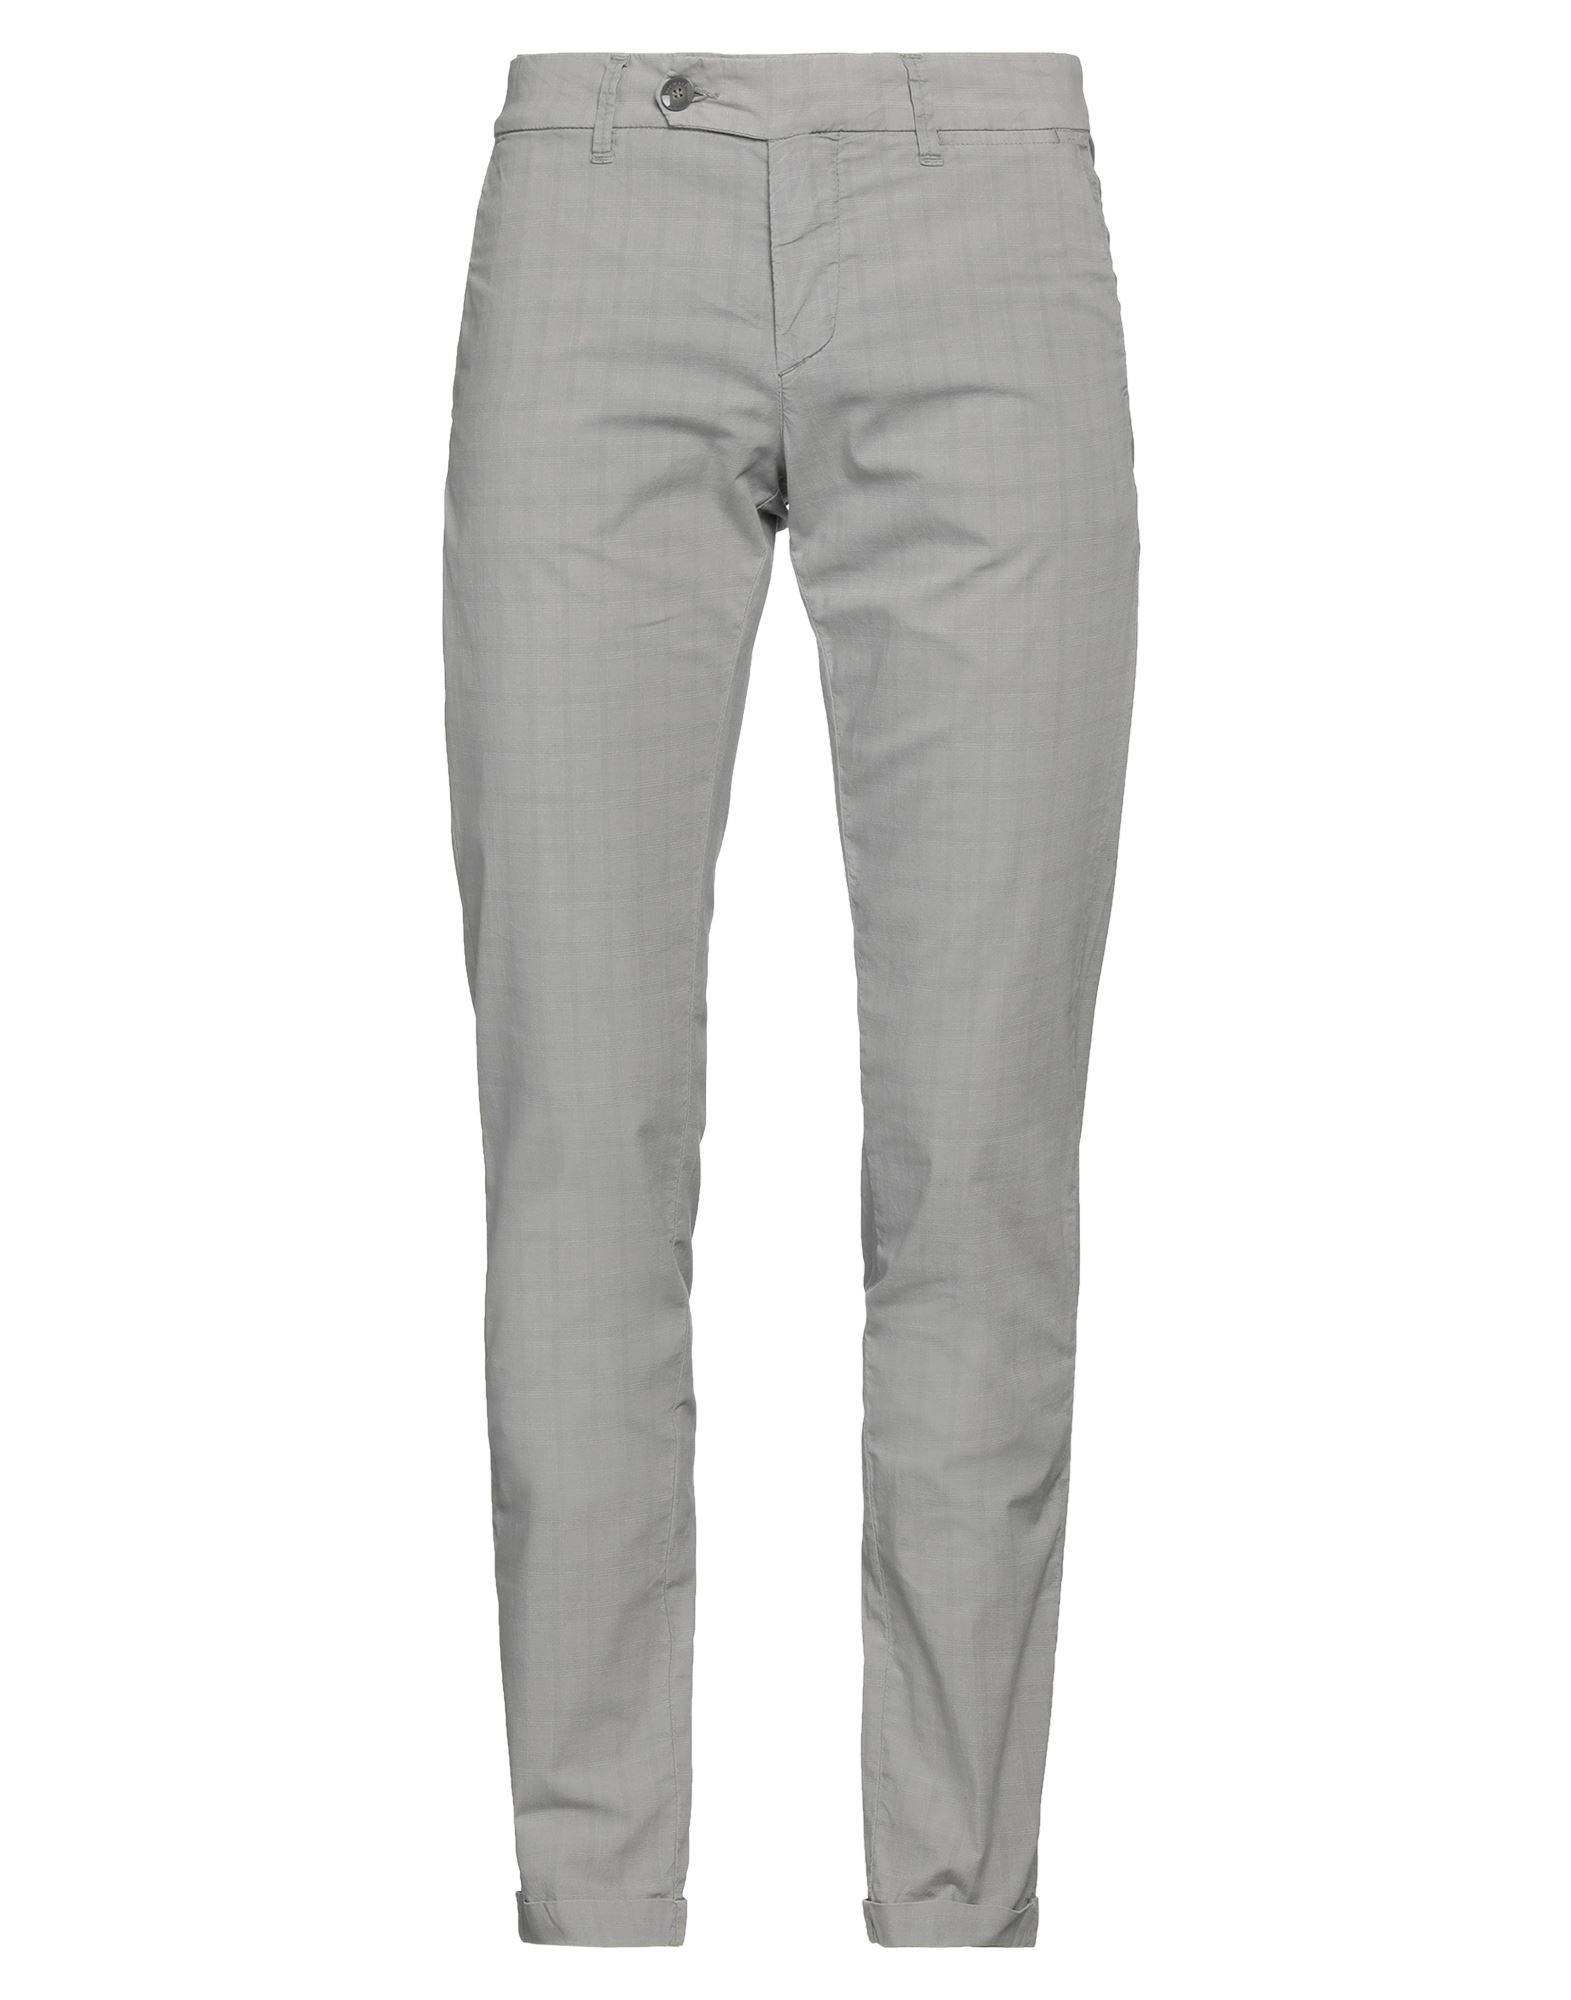 Nicwave Pants In Gray